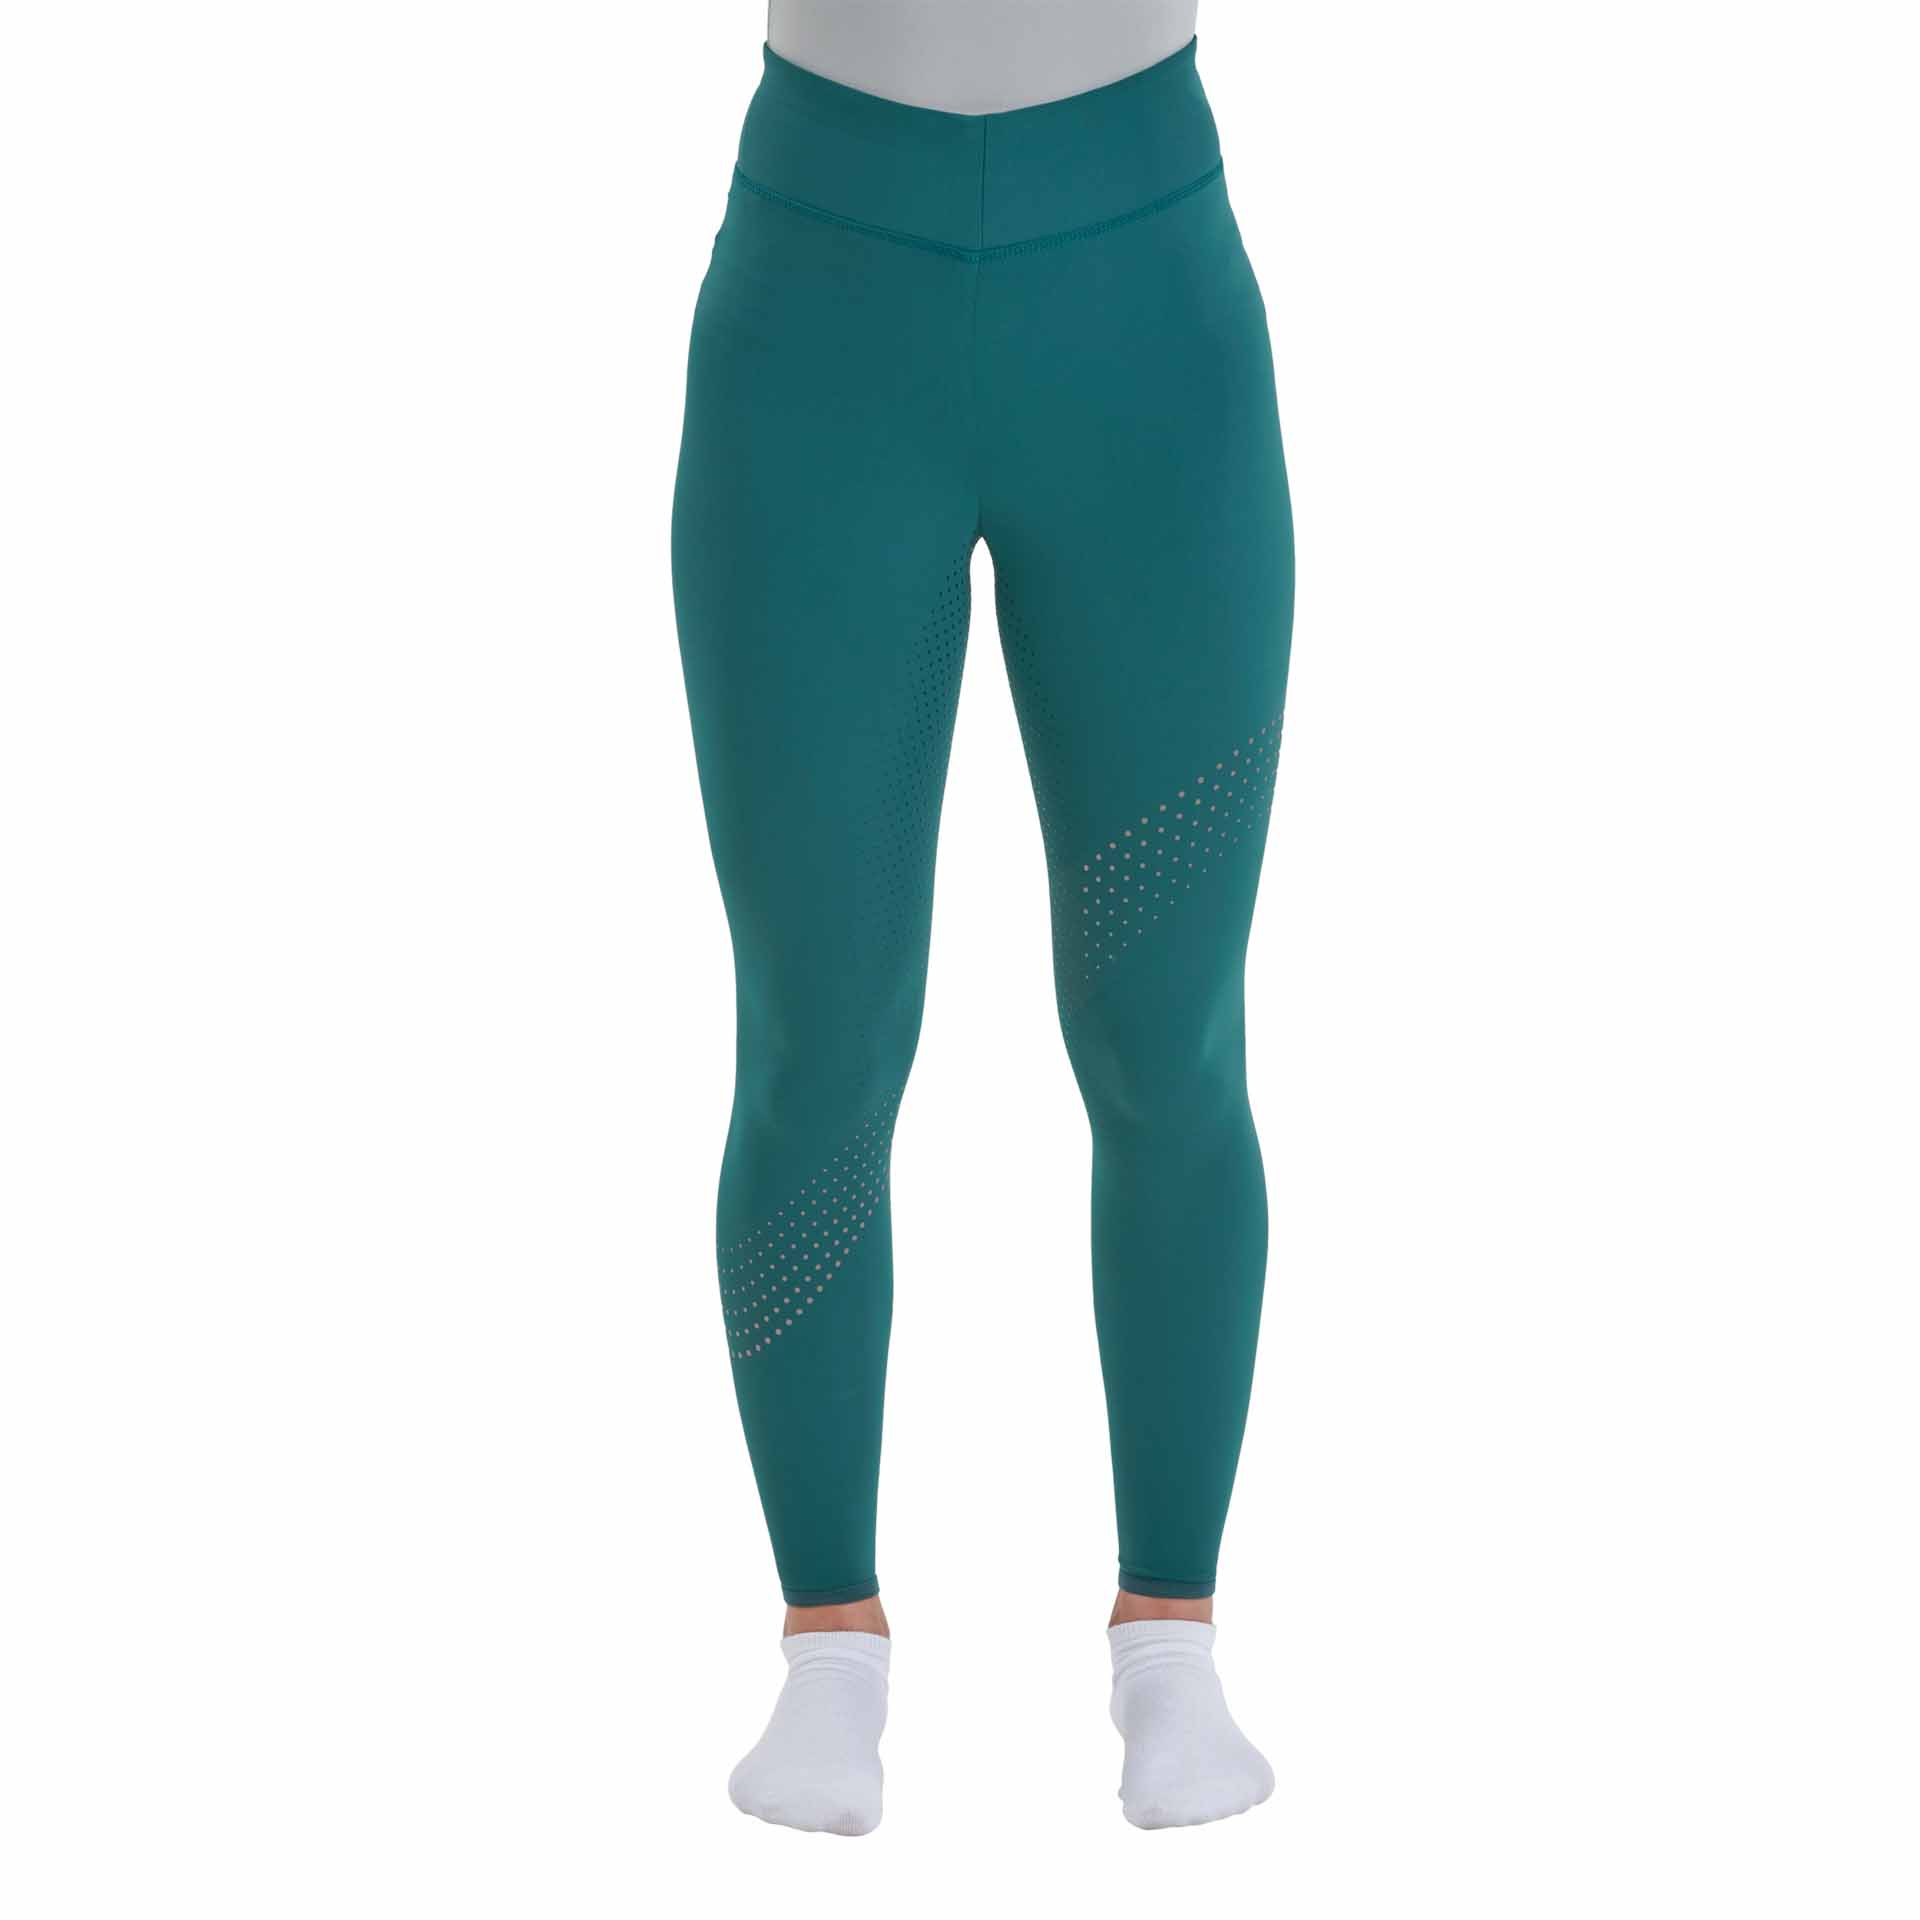 BUSSE Riding-Tights JUNE 34 teal green